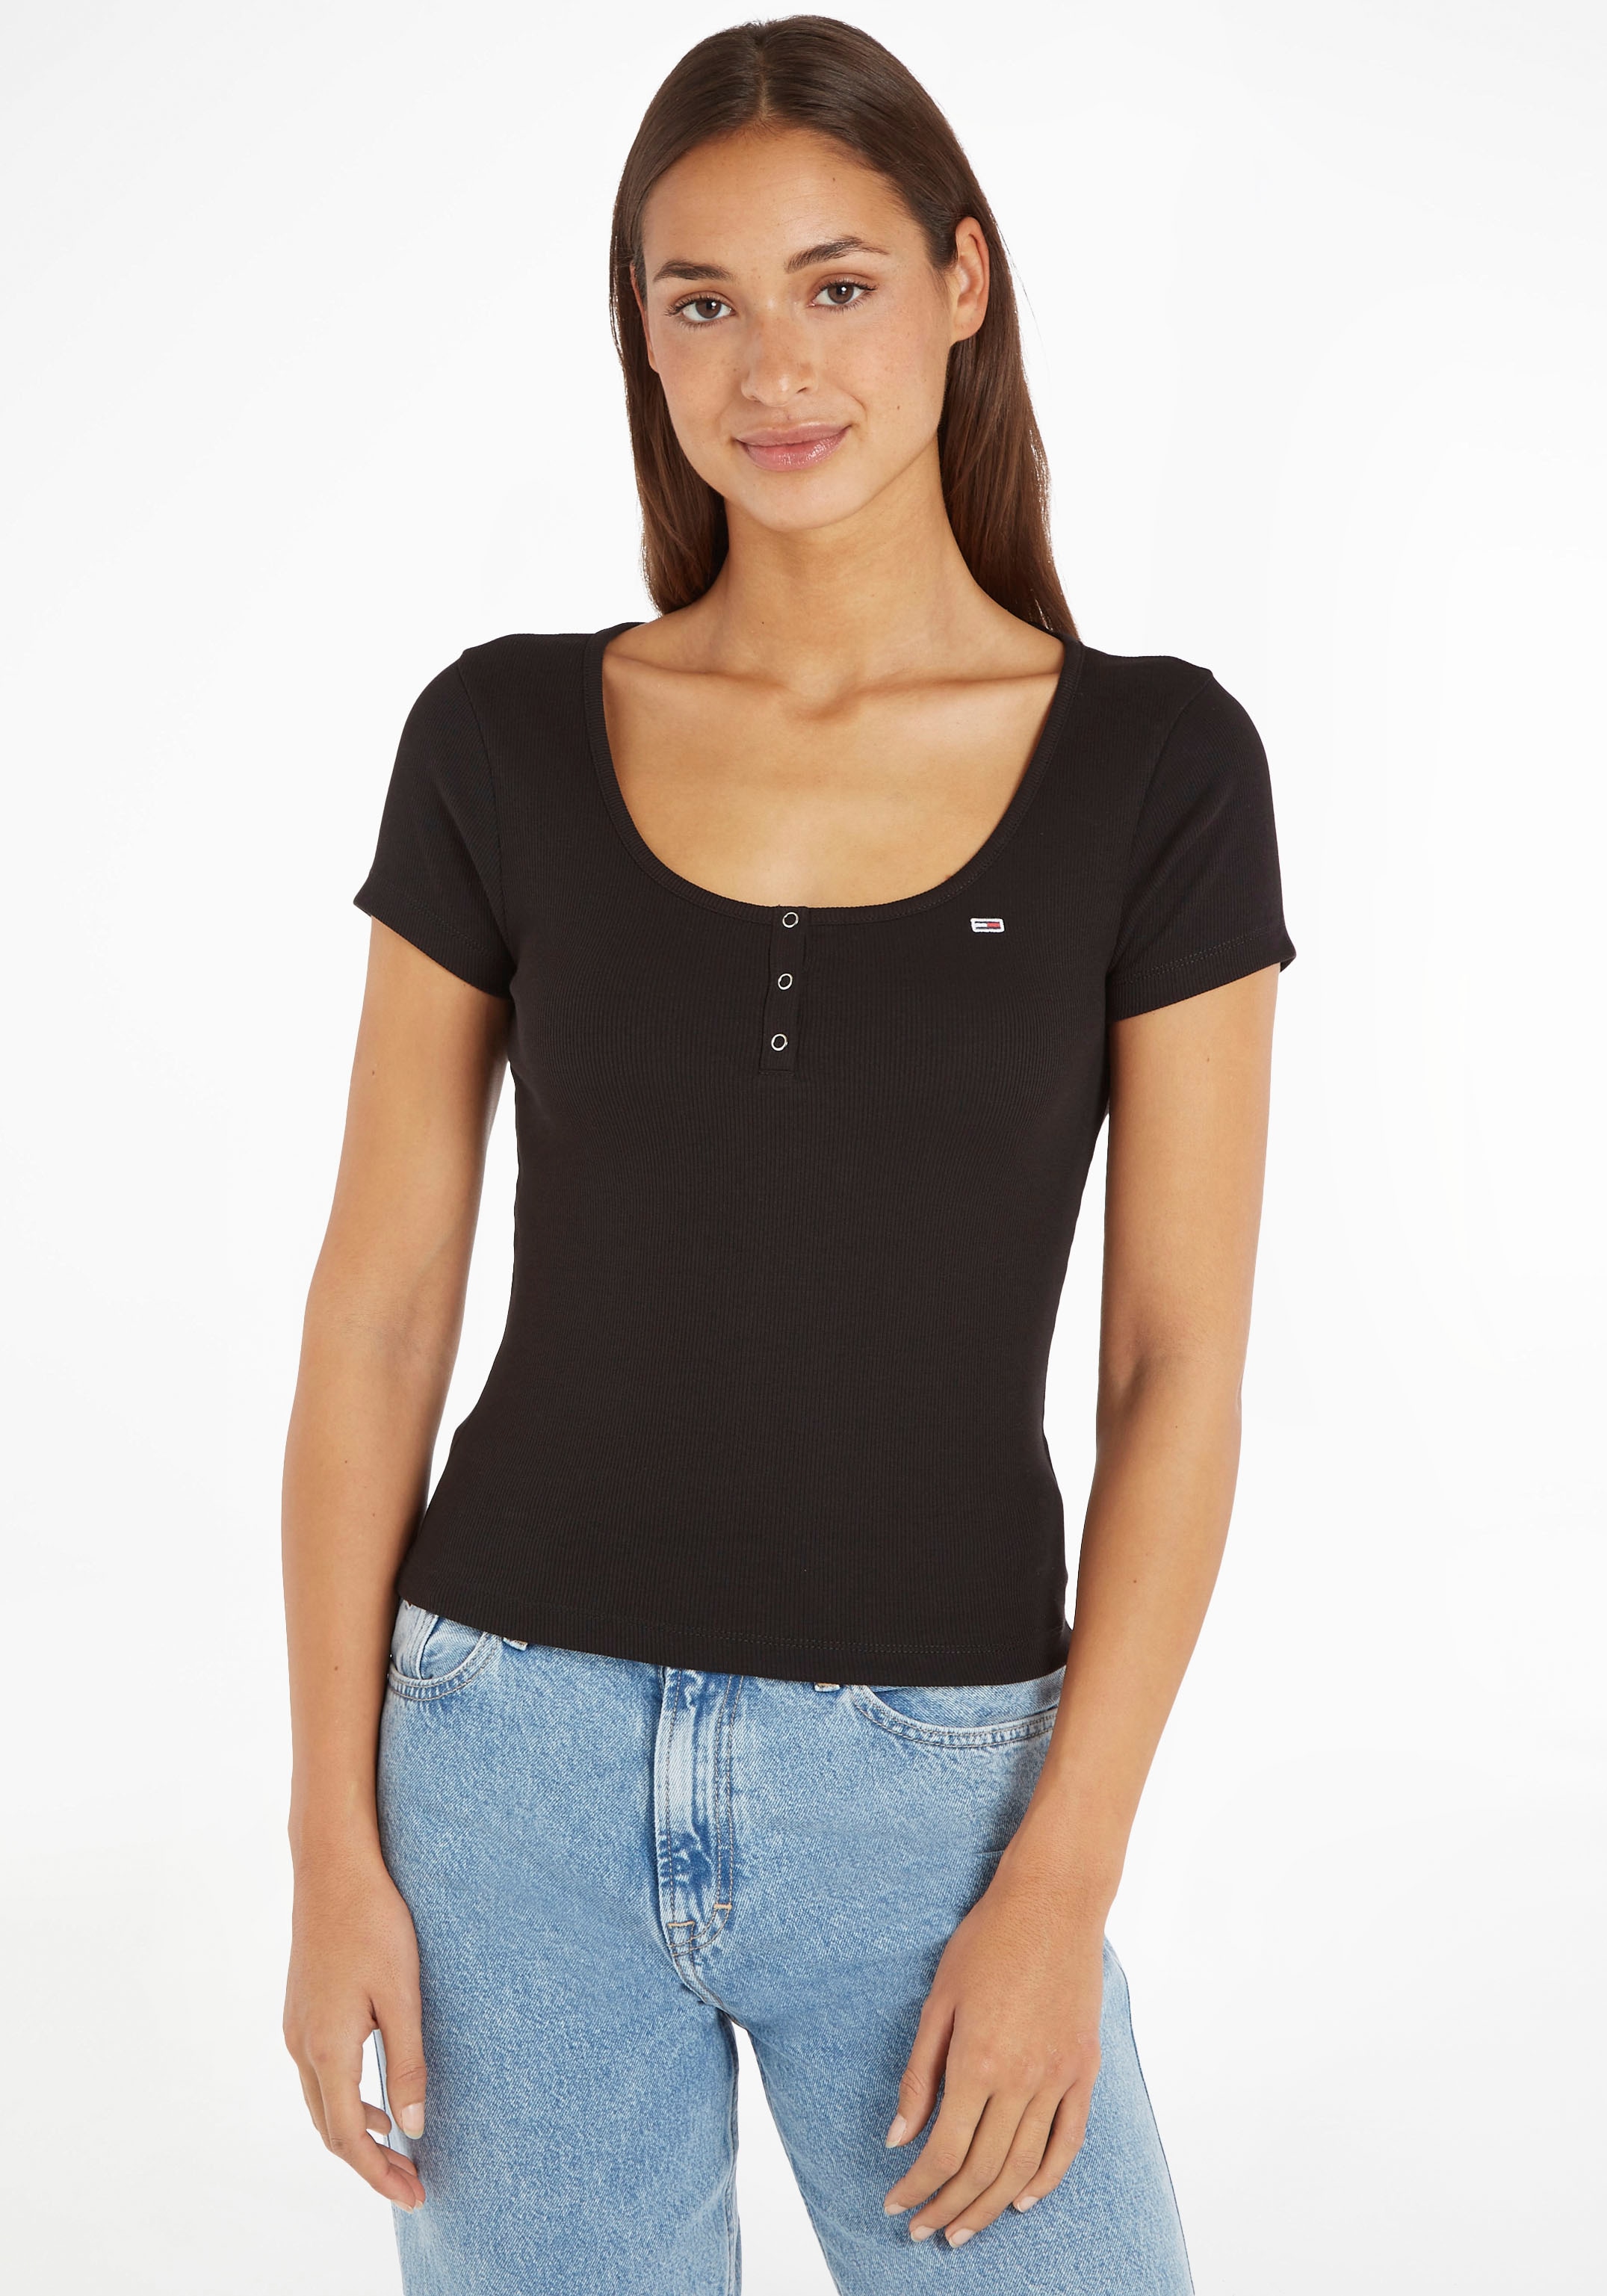 Tommy Jeans T-Shirt »TJW C-NECK«, Jeans BUTTON ♕ mit bei Logostickerei RIB Tommy BBY